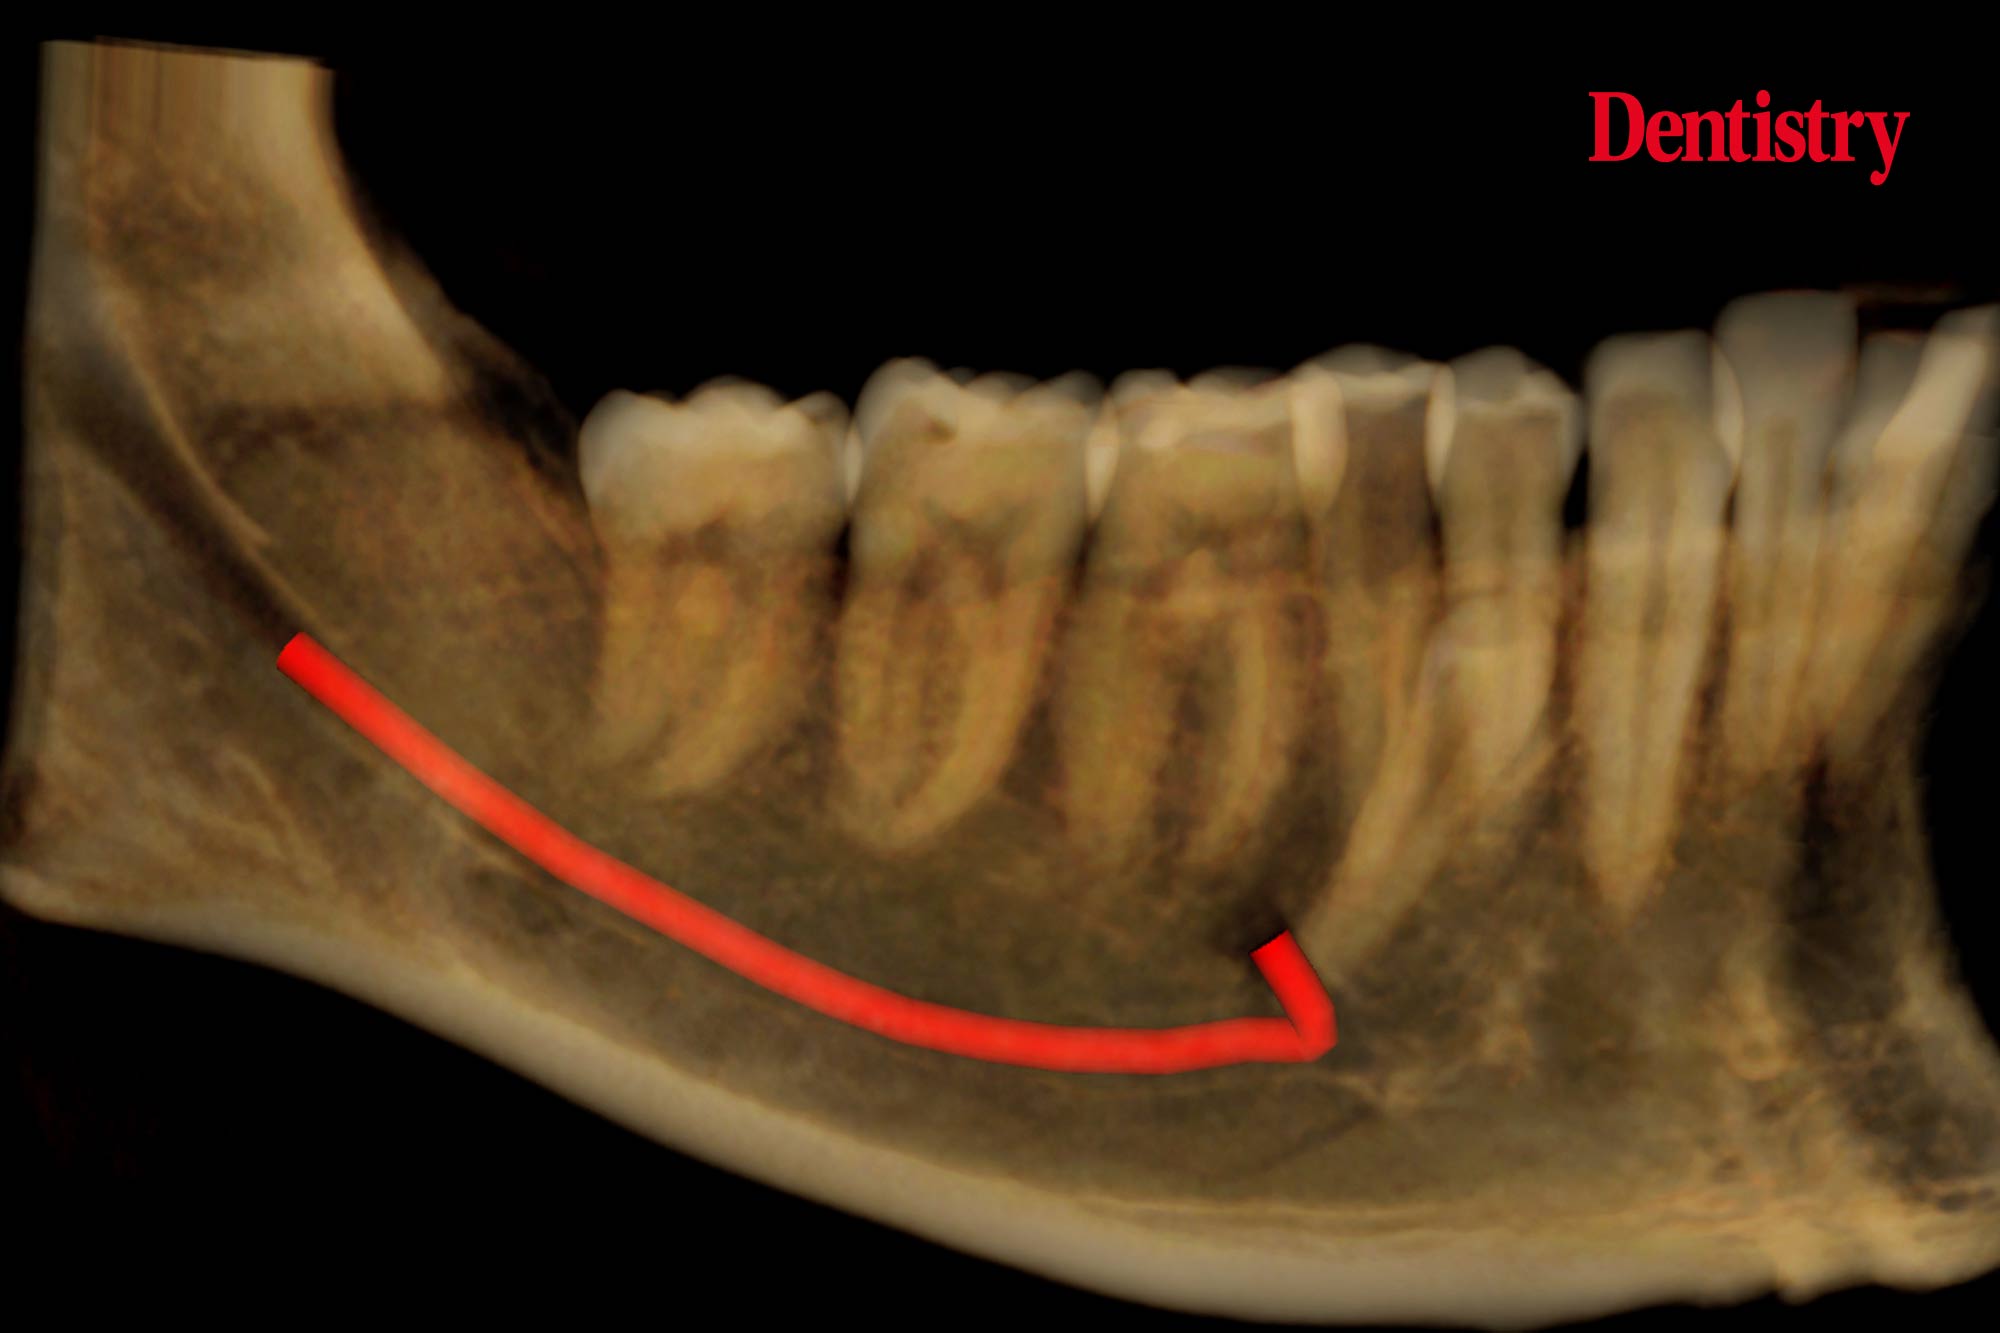 Case of the Week – unerupted supernumerary tooth in a mesioangular position